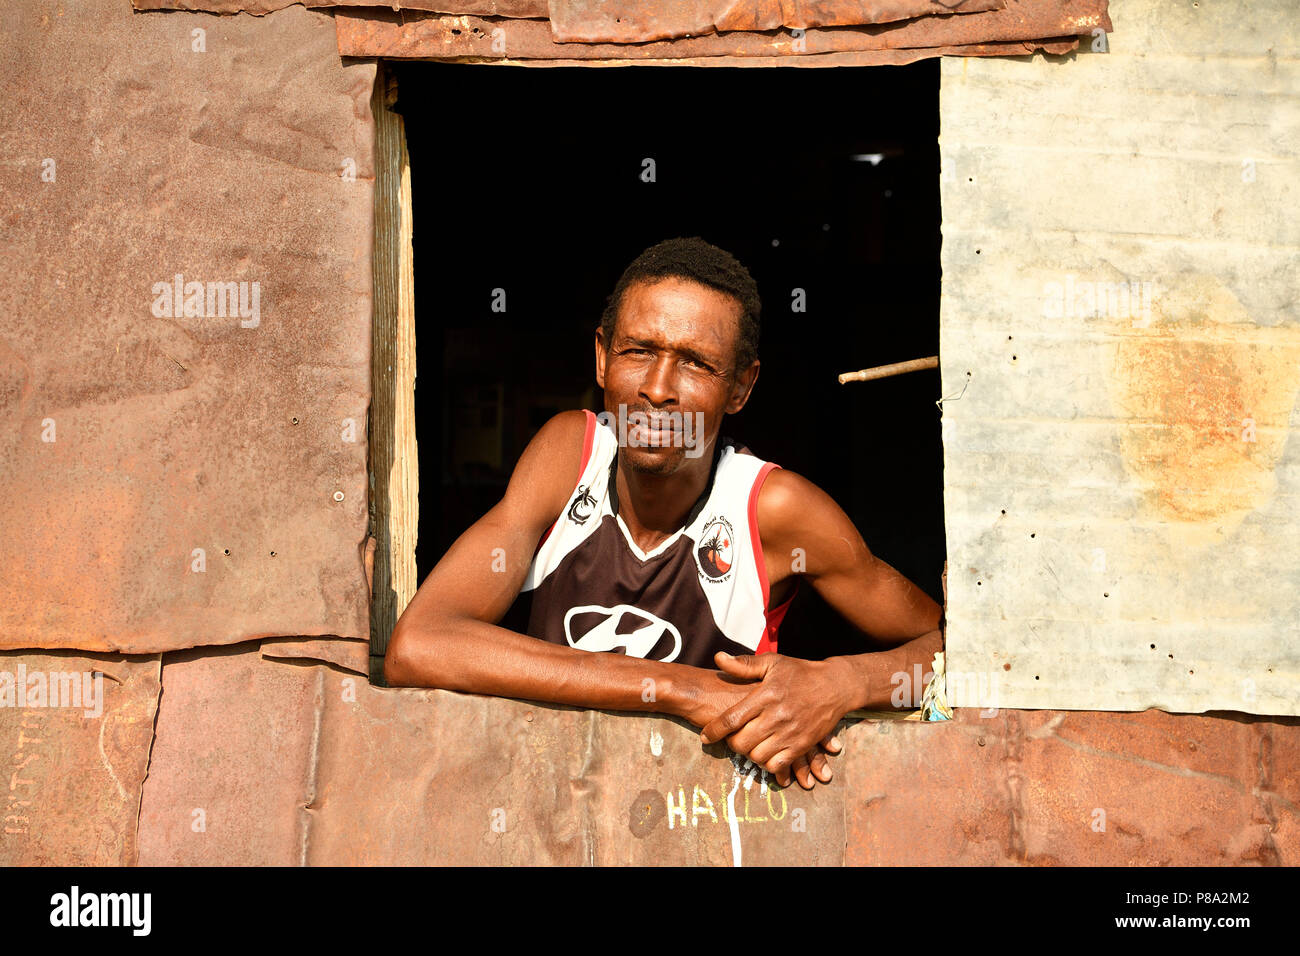 Local man looking out of the window of his poor corrugated iron hut, Spitzkoppe, Erongo region, Damaraland, Namibia Stock Photo